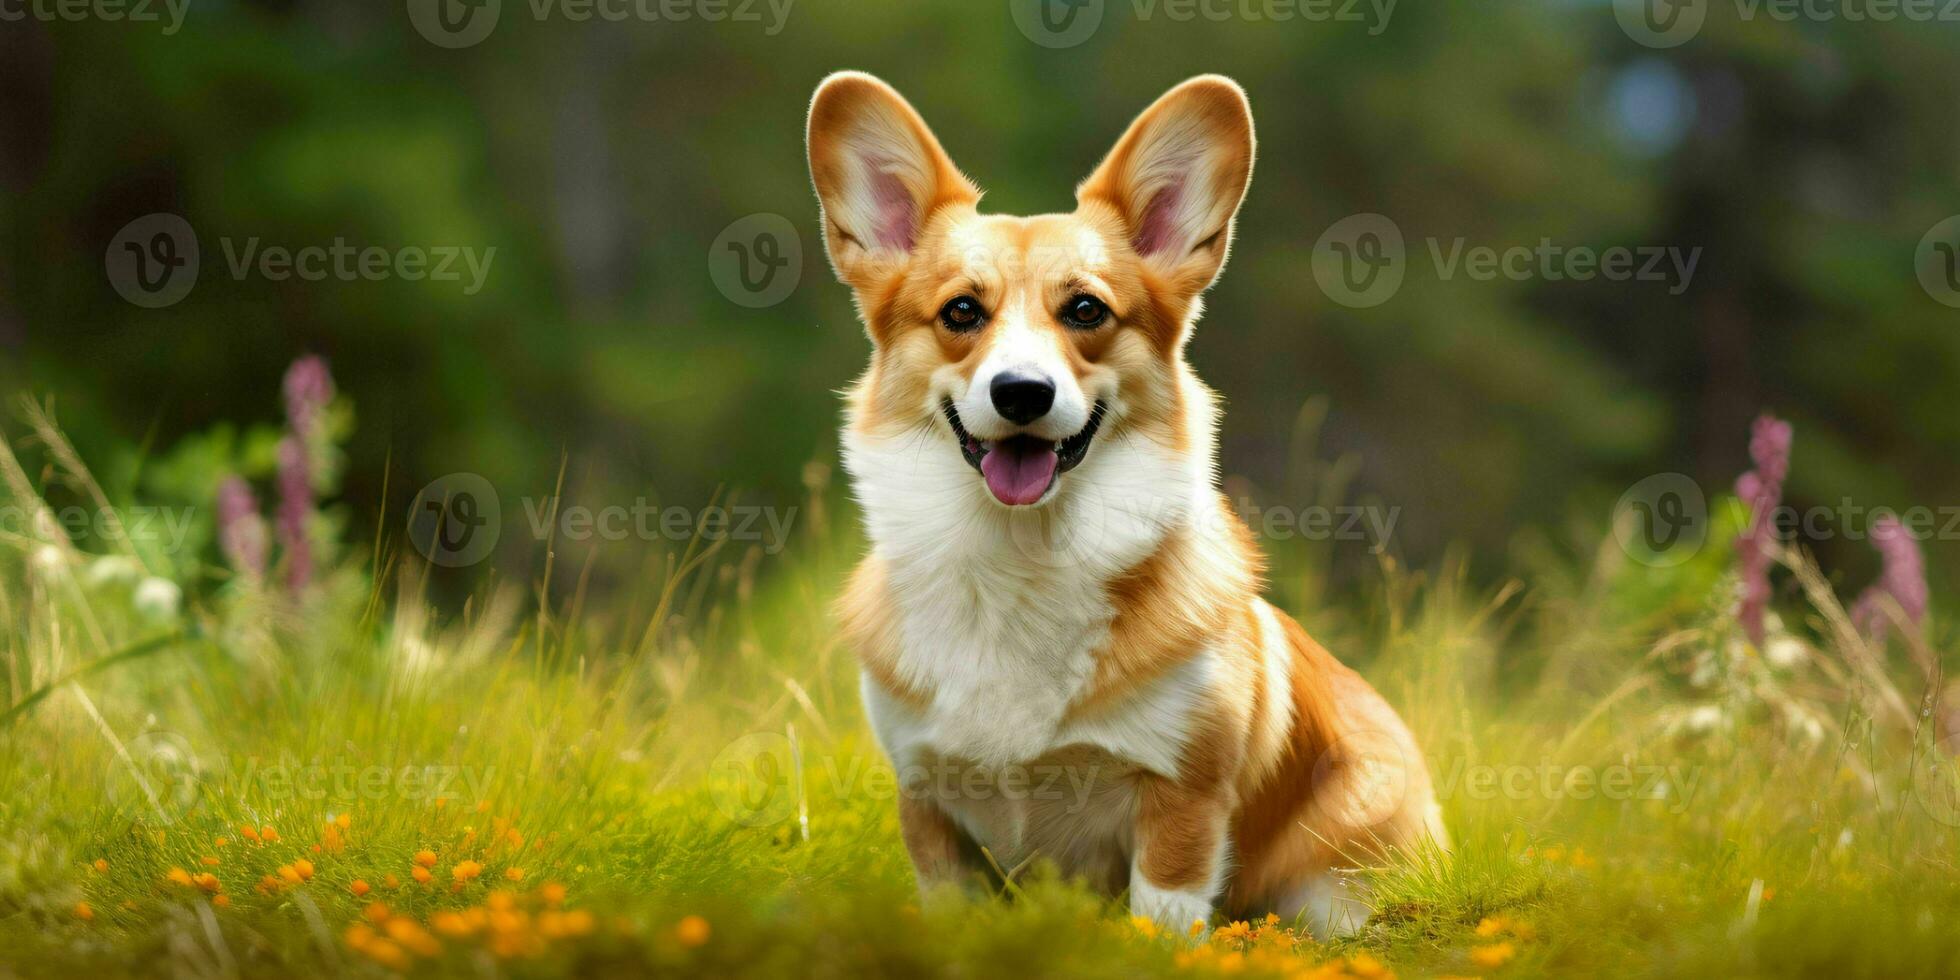 Welsh Corgi Dog on Grass Background. Portrait of Cute Dog in The Park ...